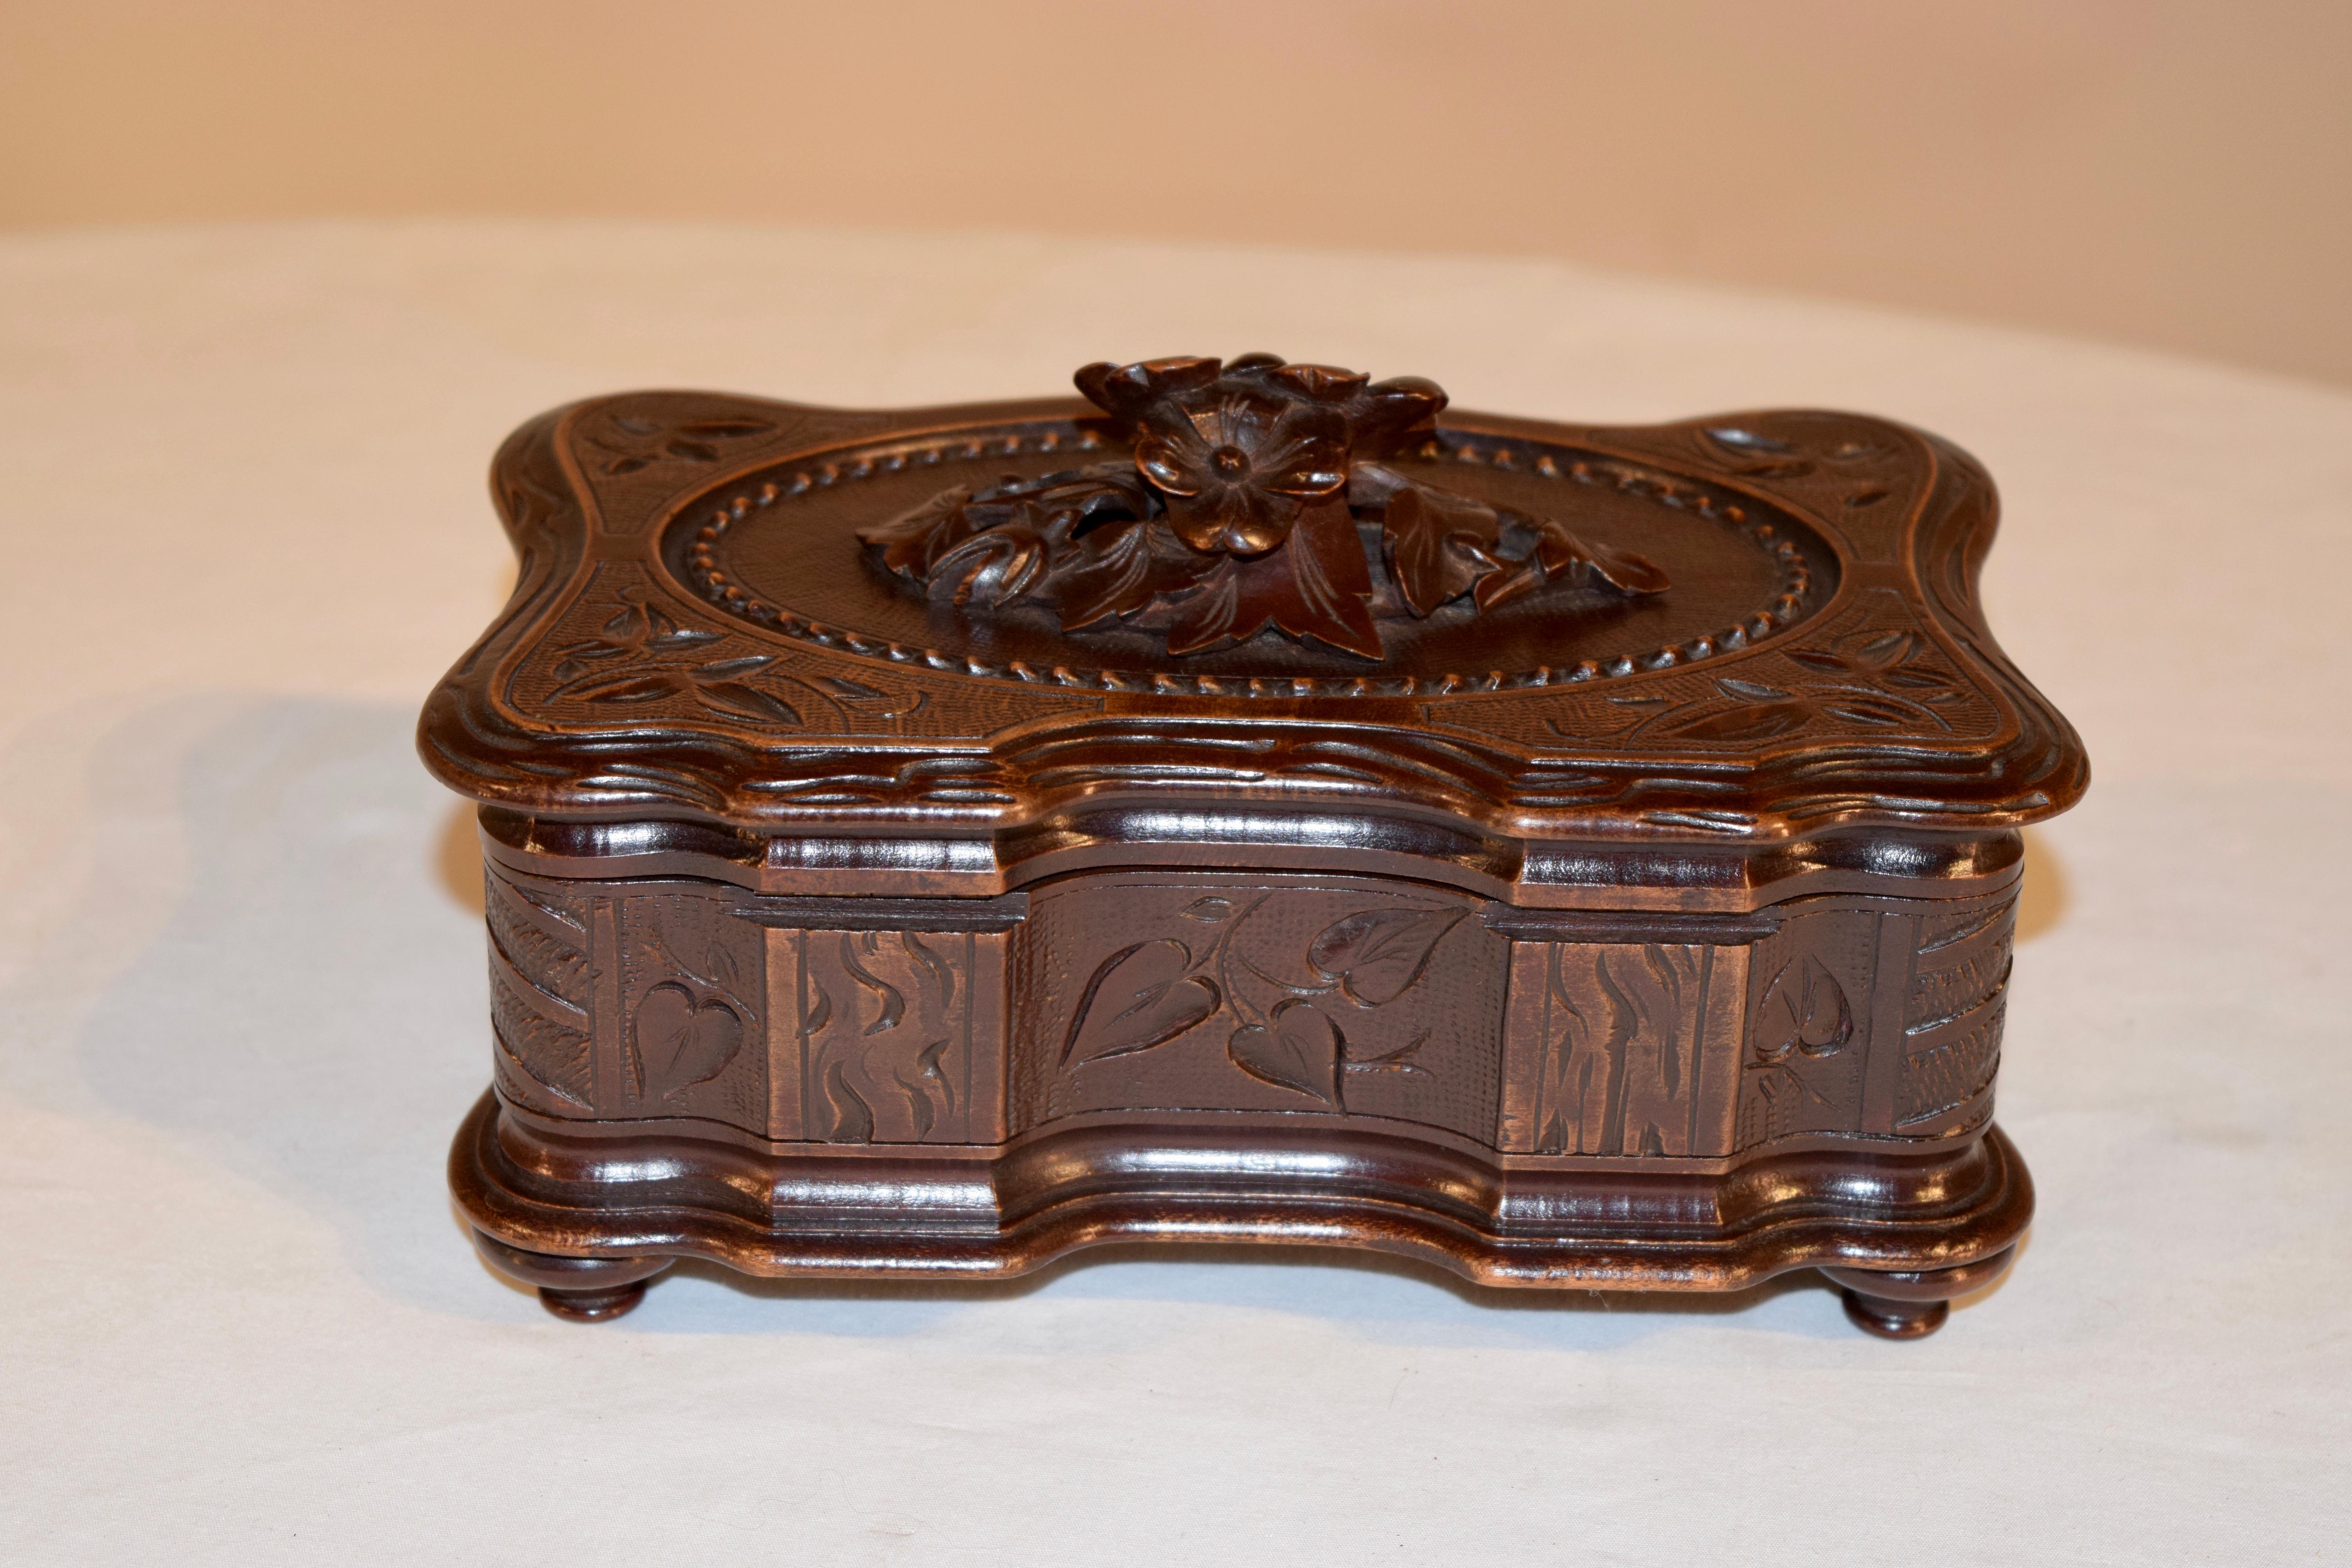 19th century hand carved jewelry box from the Black Forest region of Europe. The box has a mound of flowers carved on the top, surrounded by a hand carved and decorated surround on the lid and hand bevelled edge, which is also serpentined. The lid